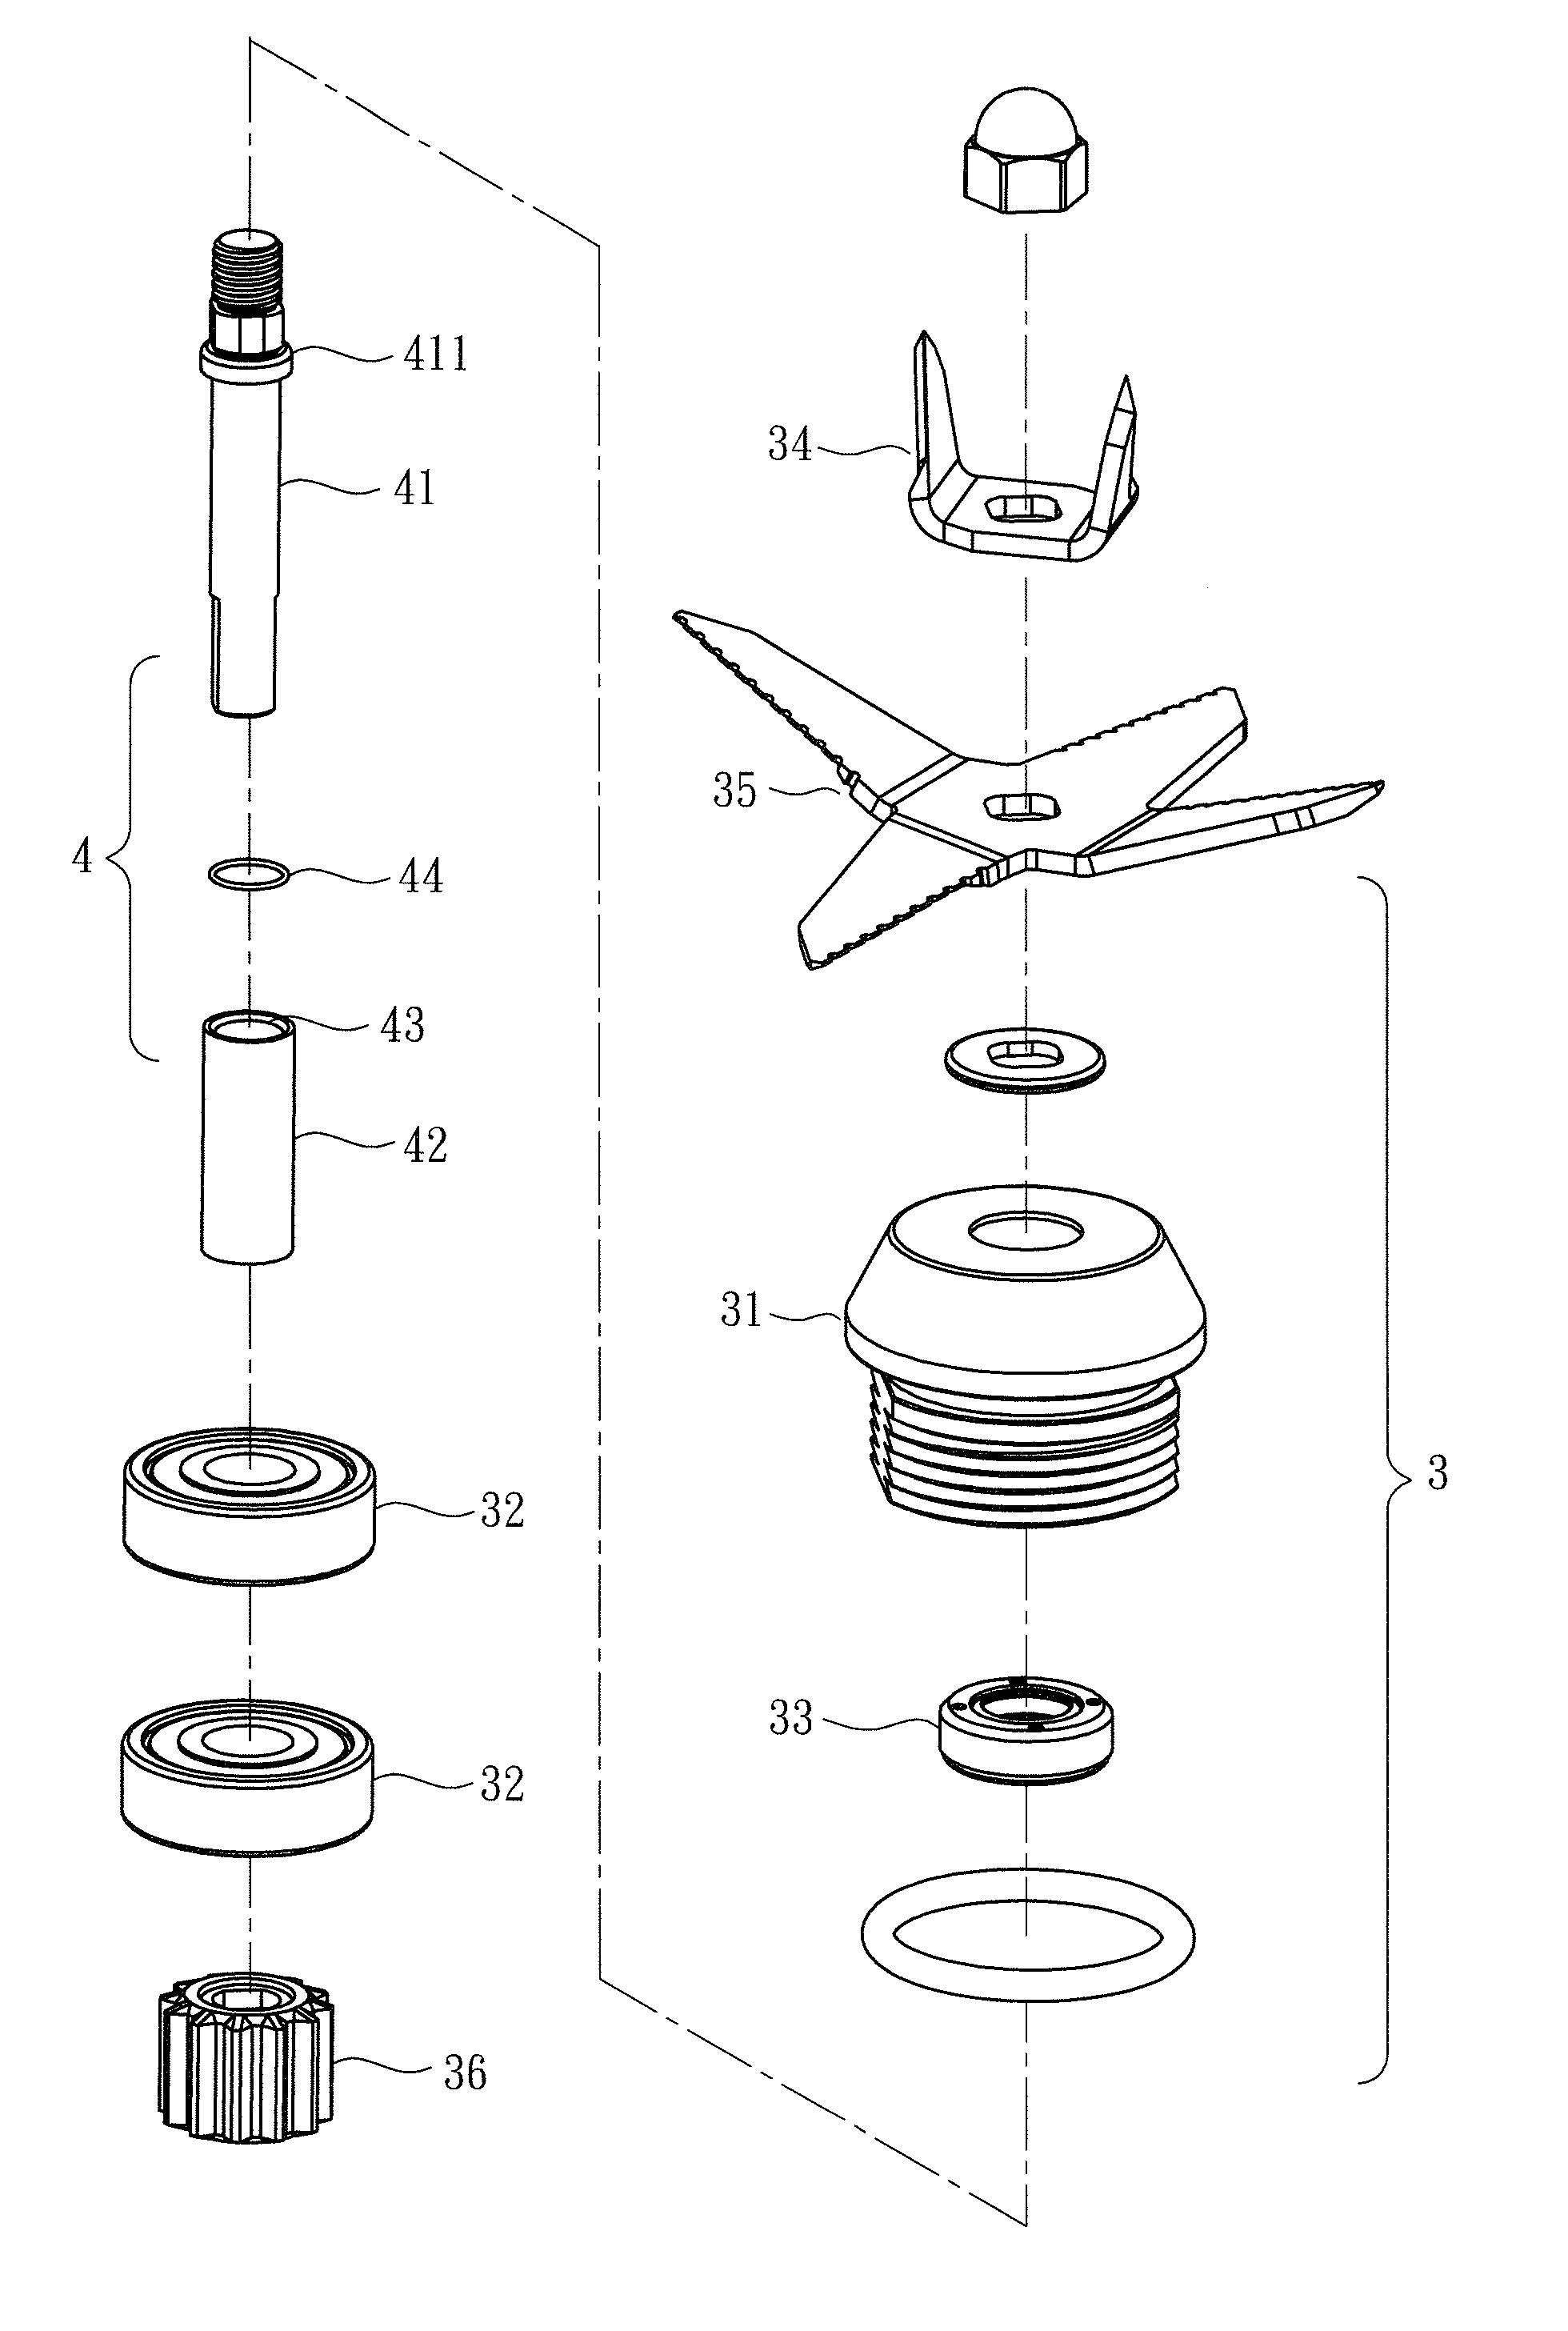 Blenderblade assembly and shaft assembly thereof